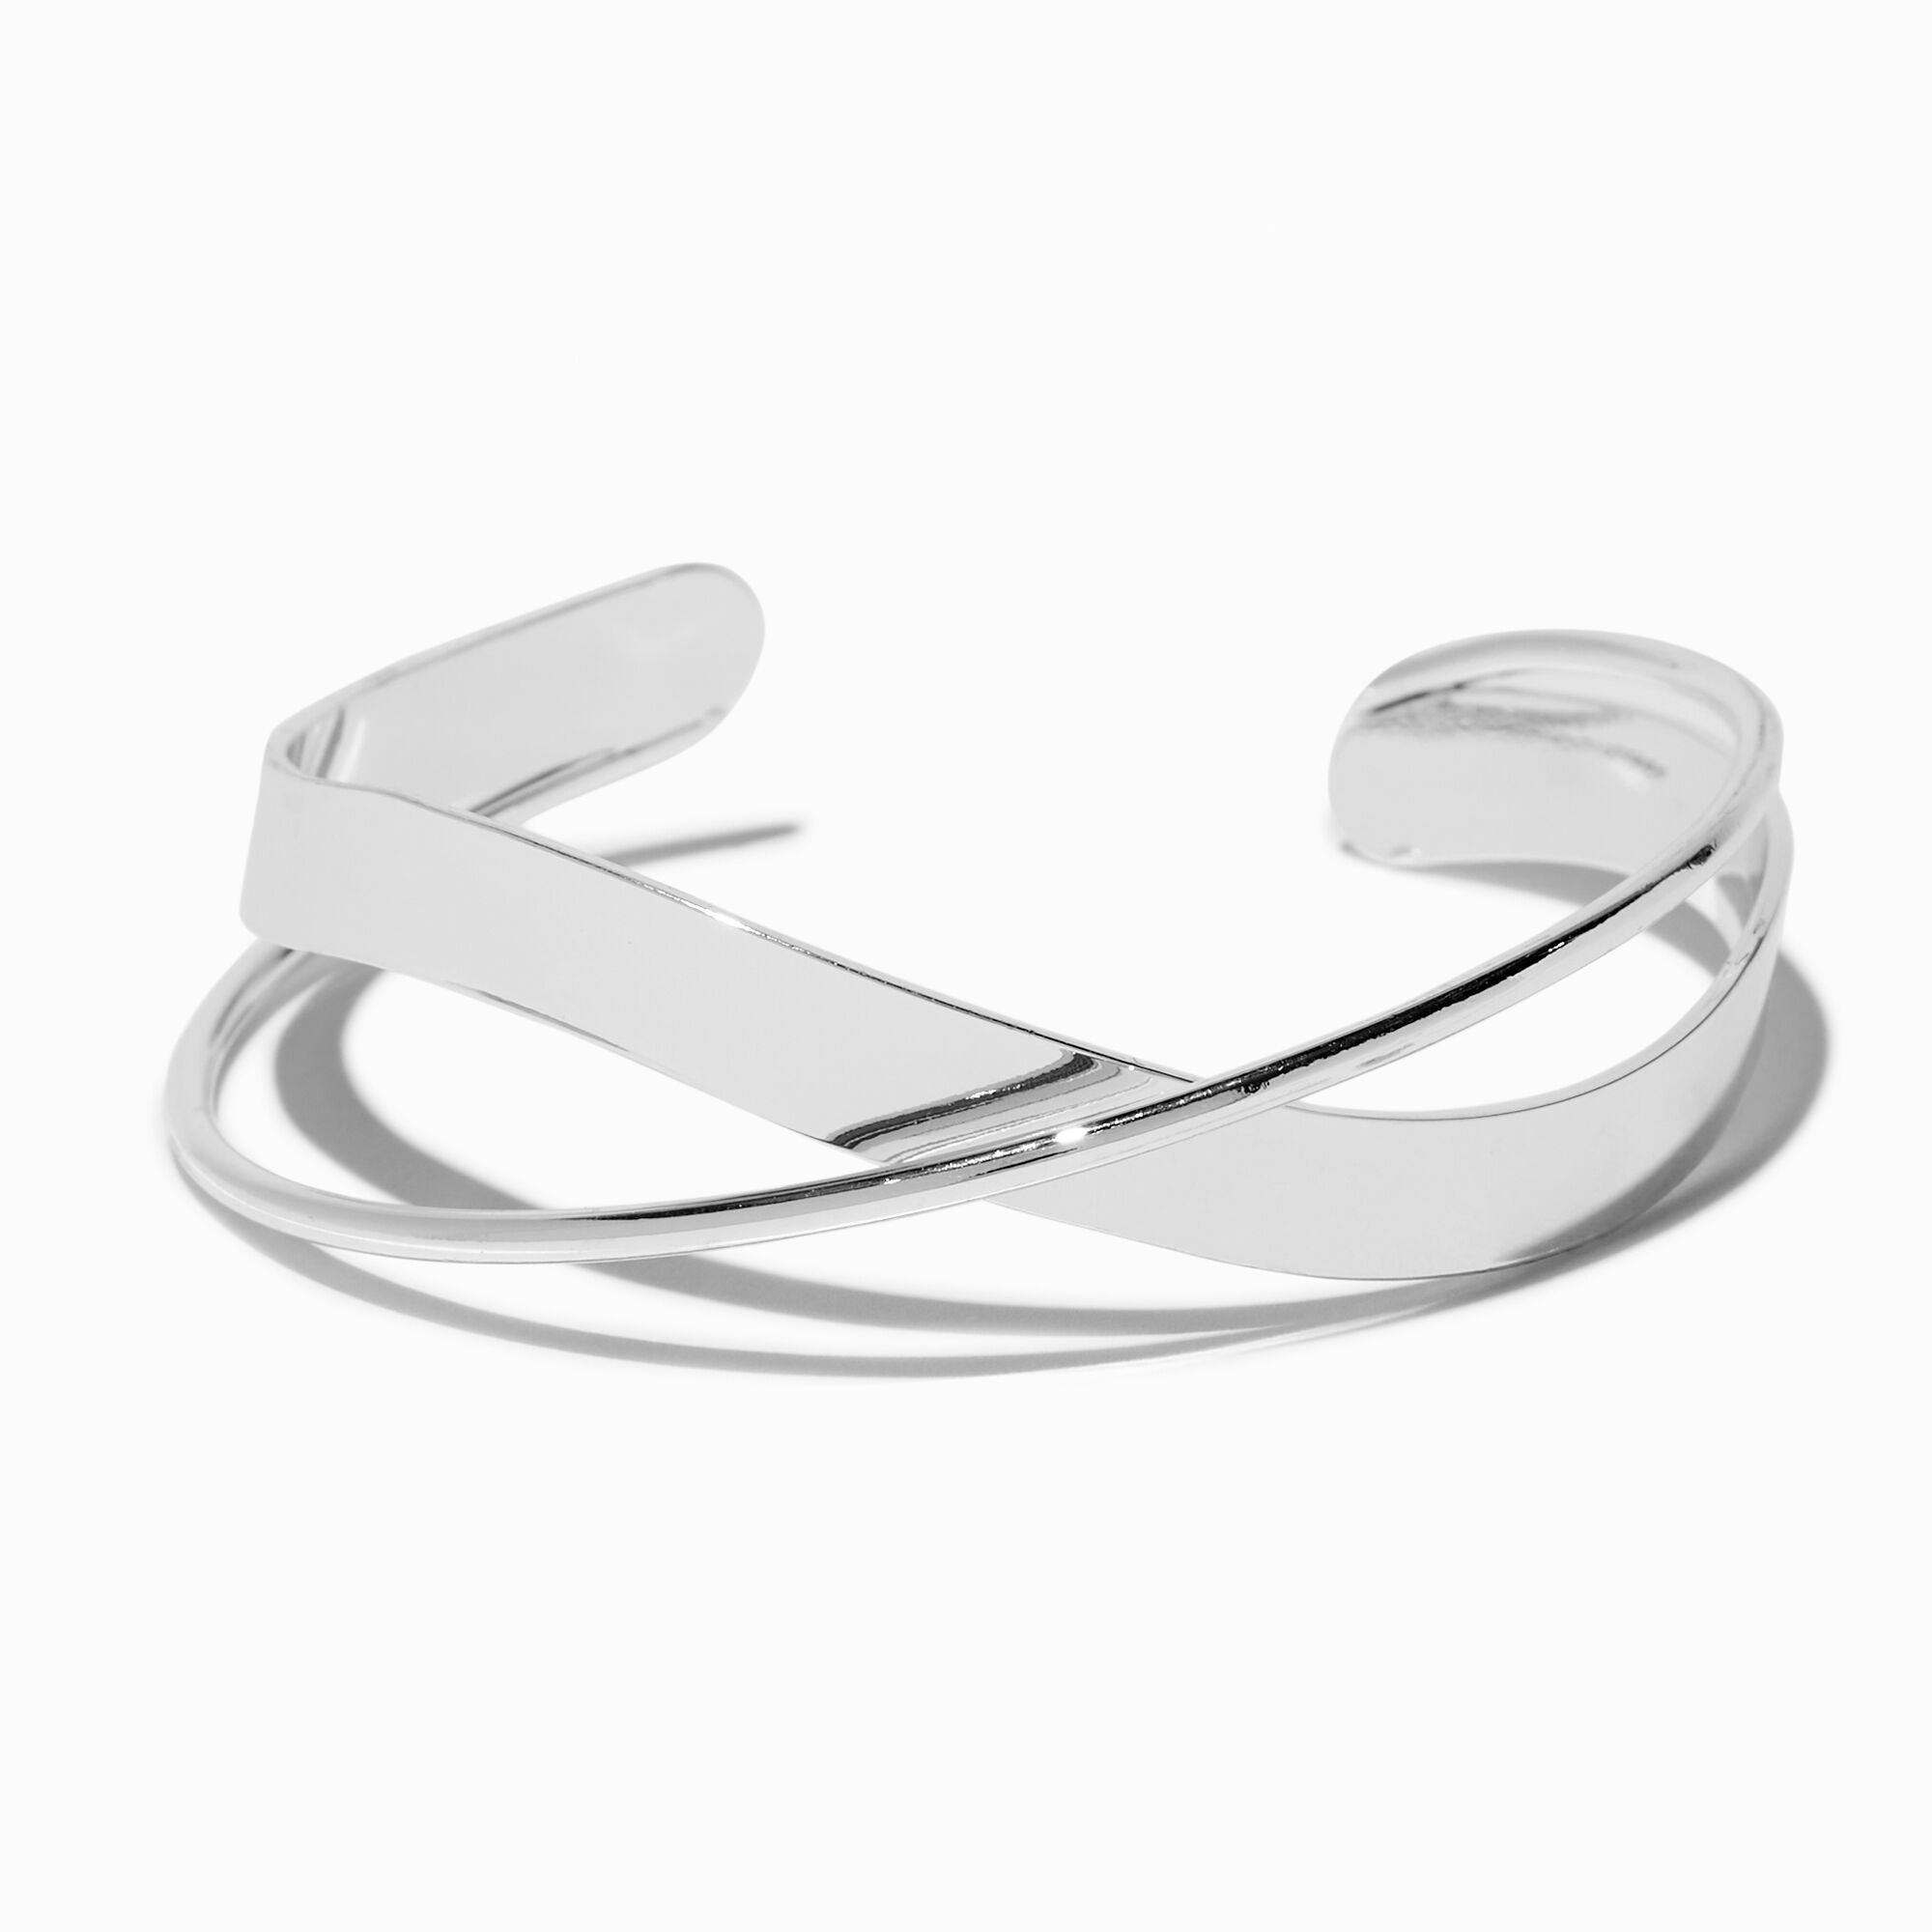 View Claires Tone Crossover Cuff Bracelet Silver information